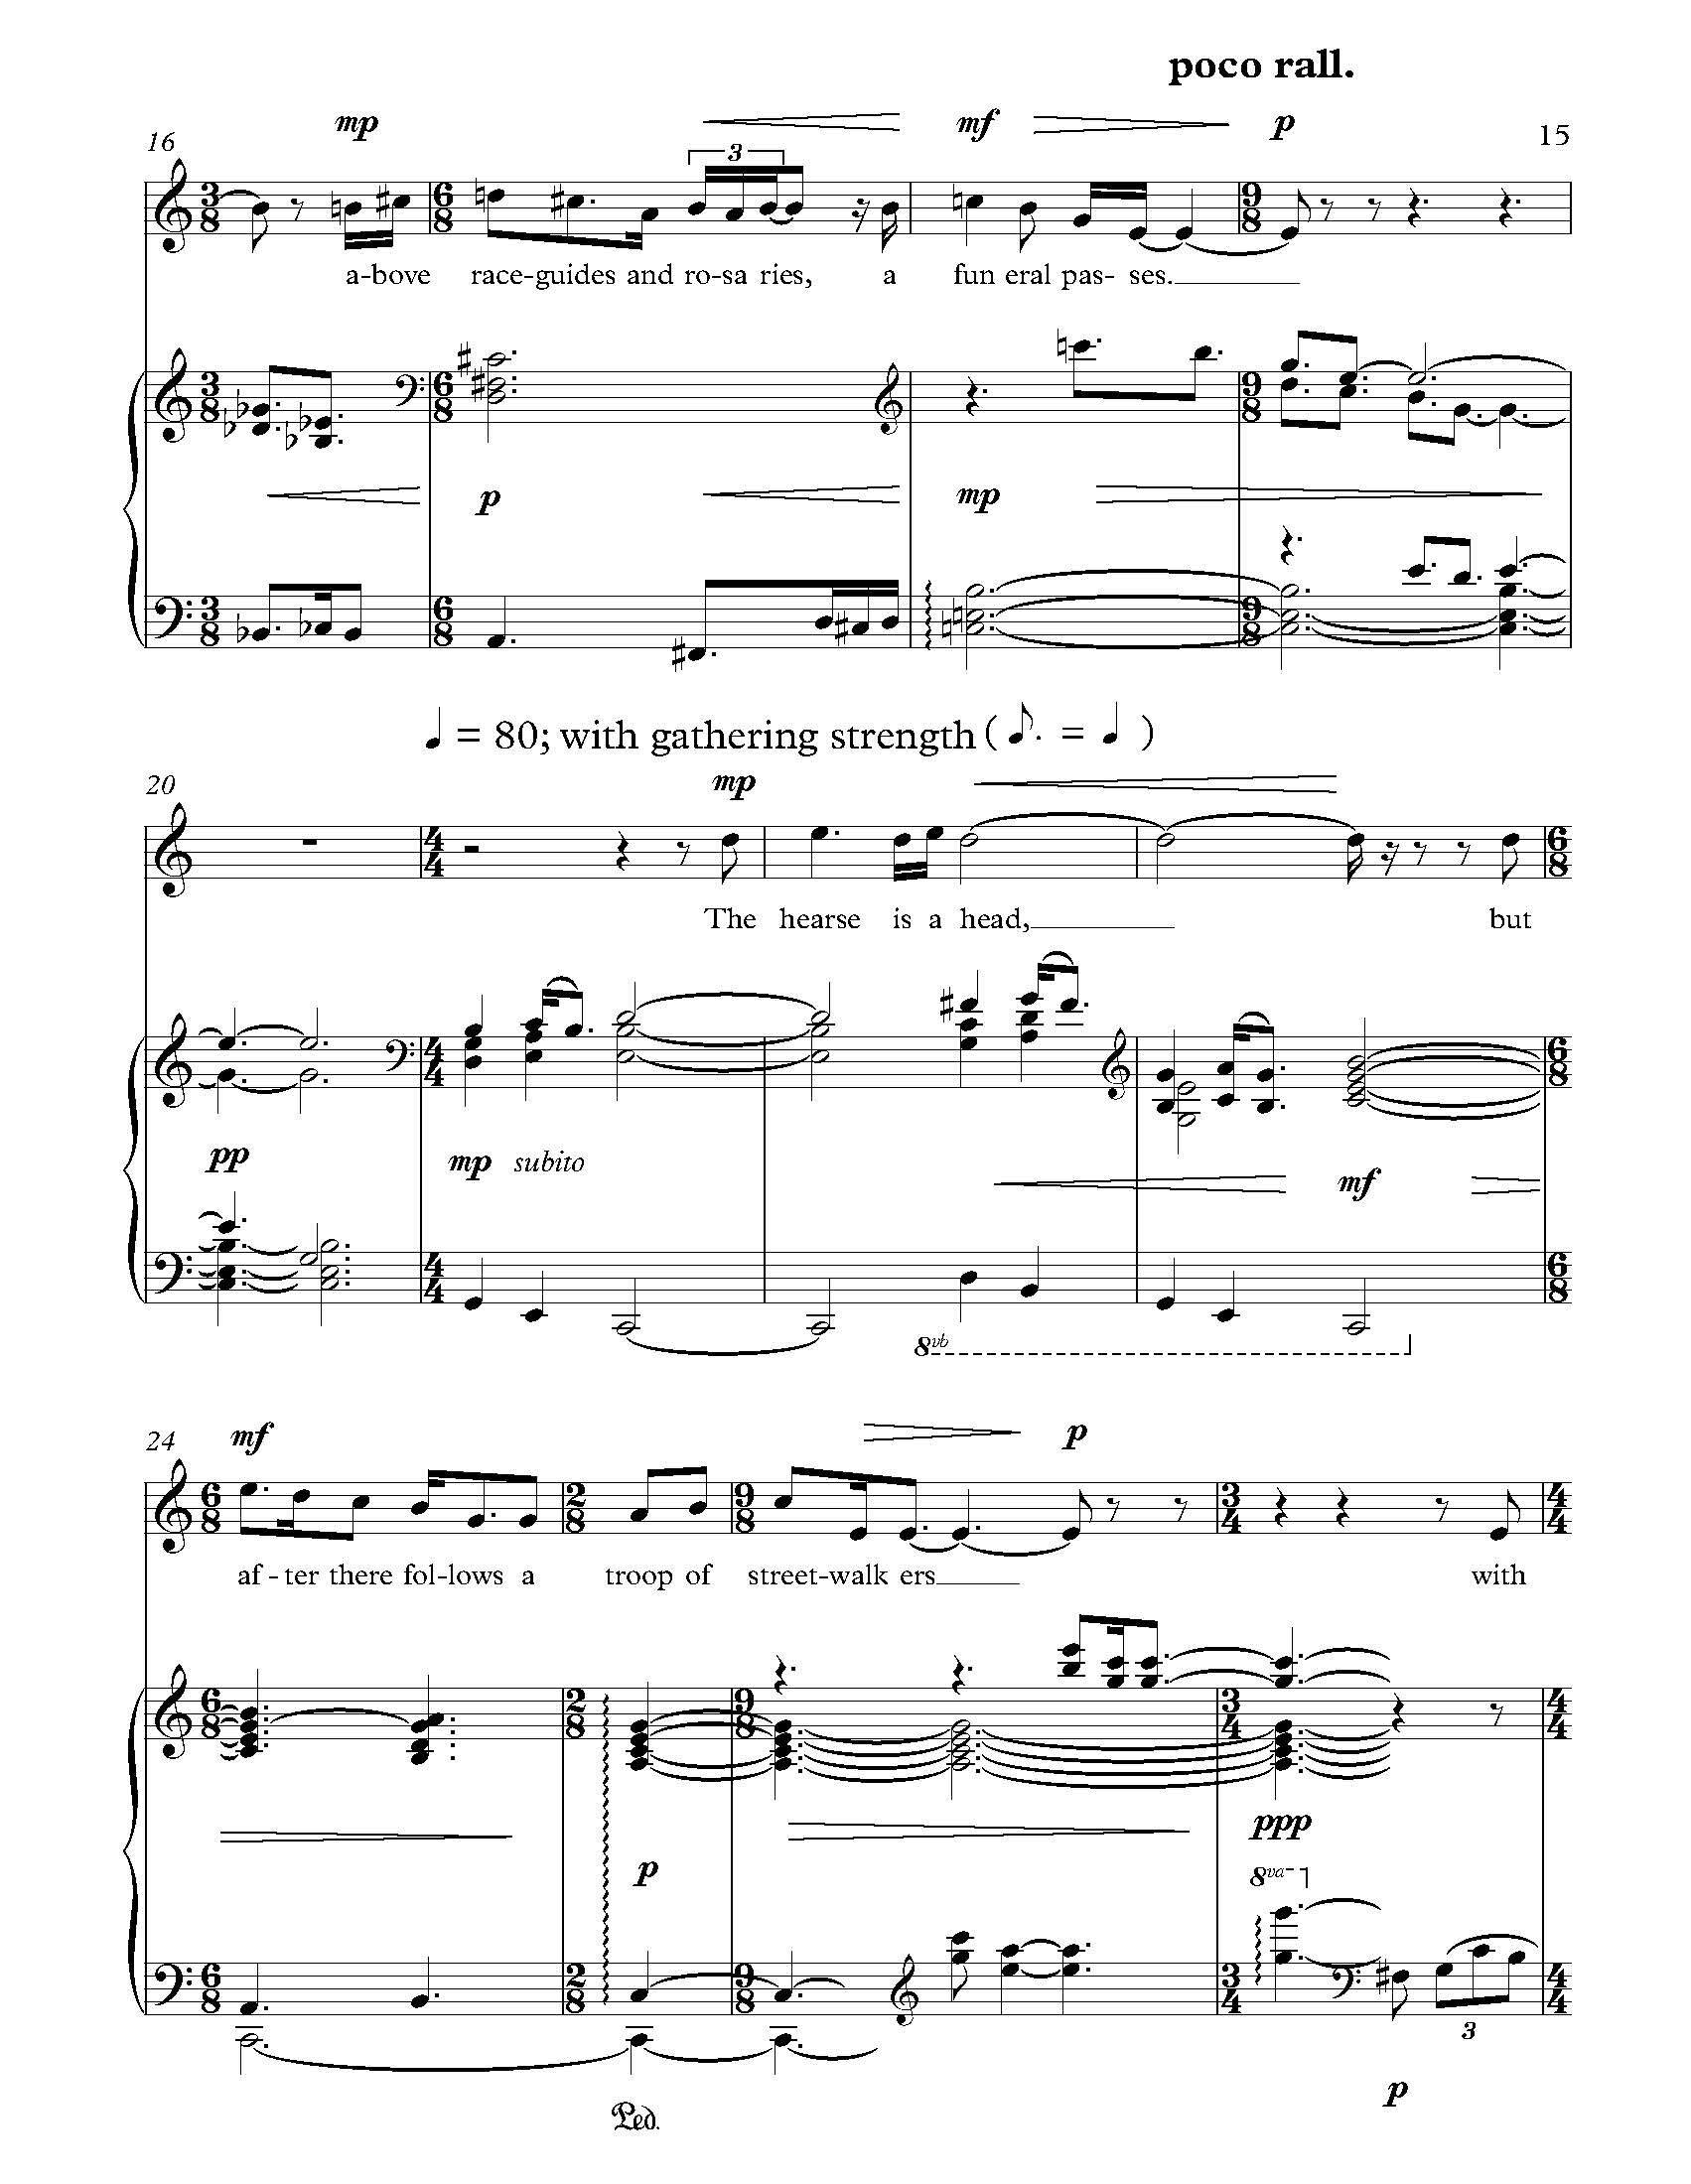 The Explosion - Complete Score_Page_21.jpg